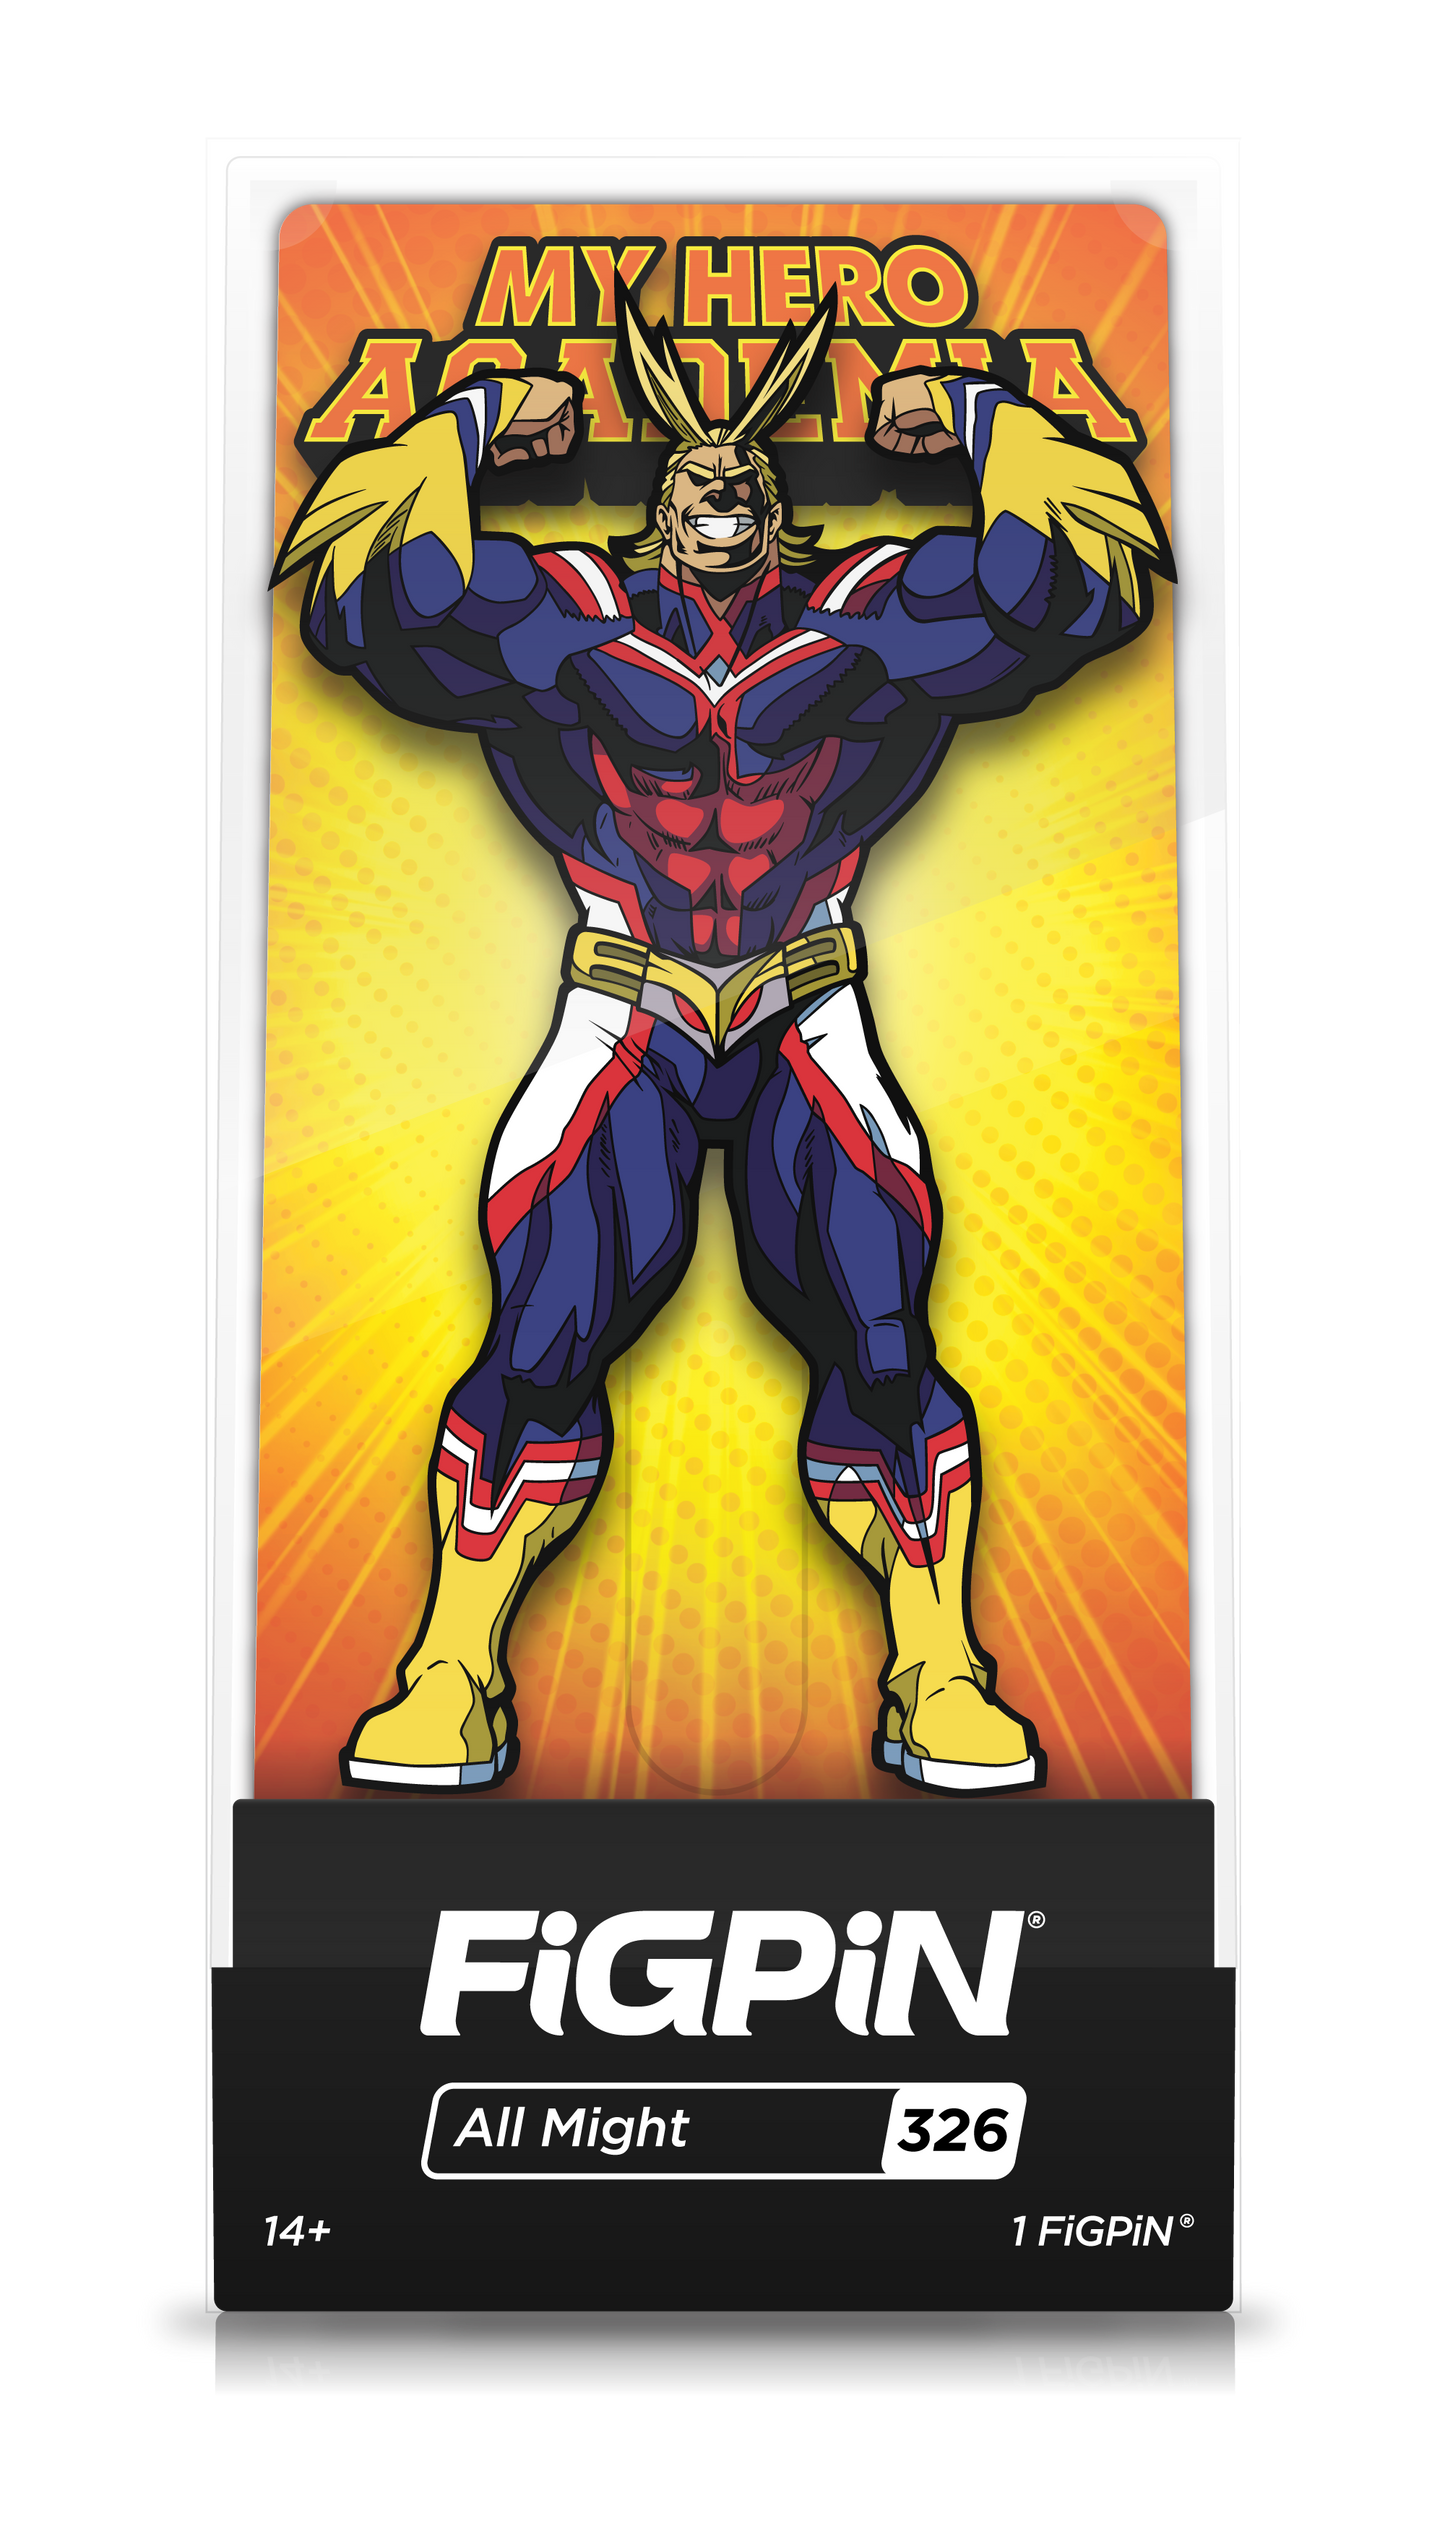 All Might #326 - My Hero Academia - FiGPiN